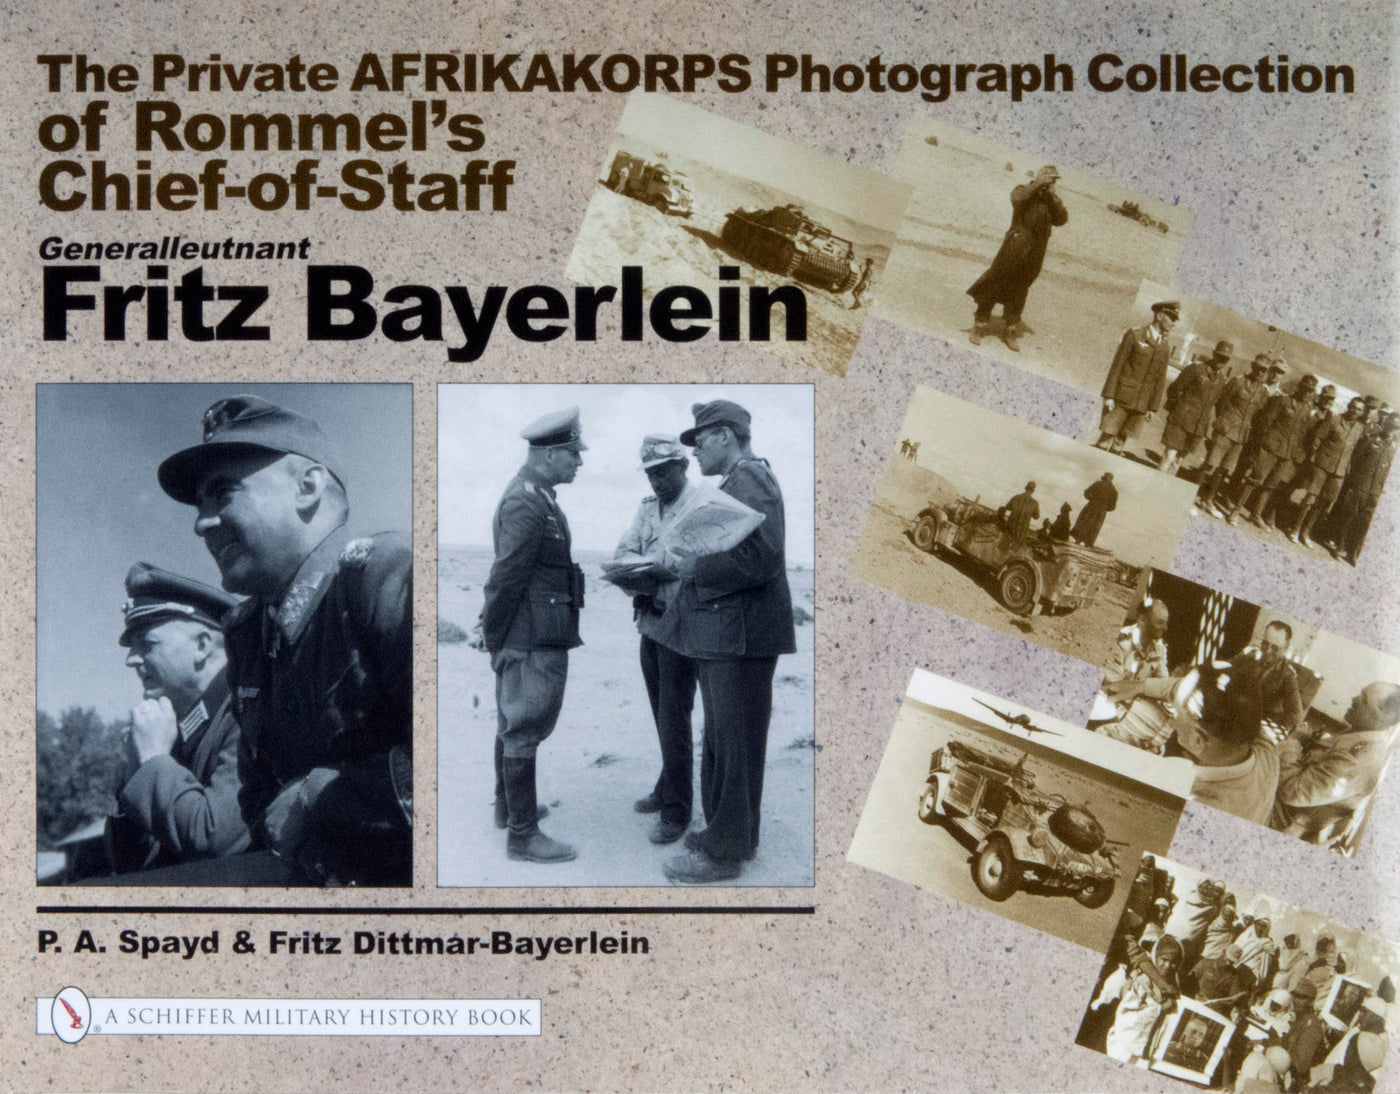 The Private Afrikakorps Photograph Collection of Rommel's Chief-of Staff Generalleutnant Fritz Bayerlein